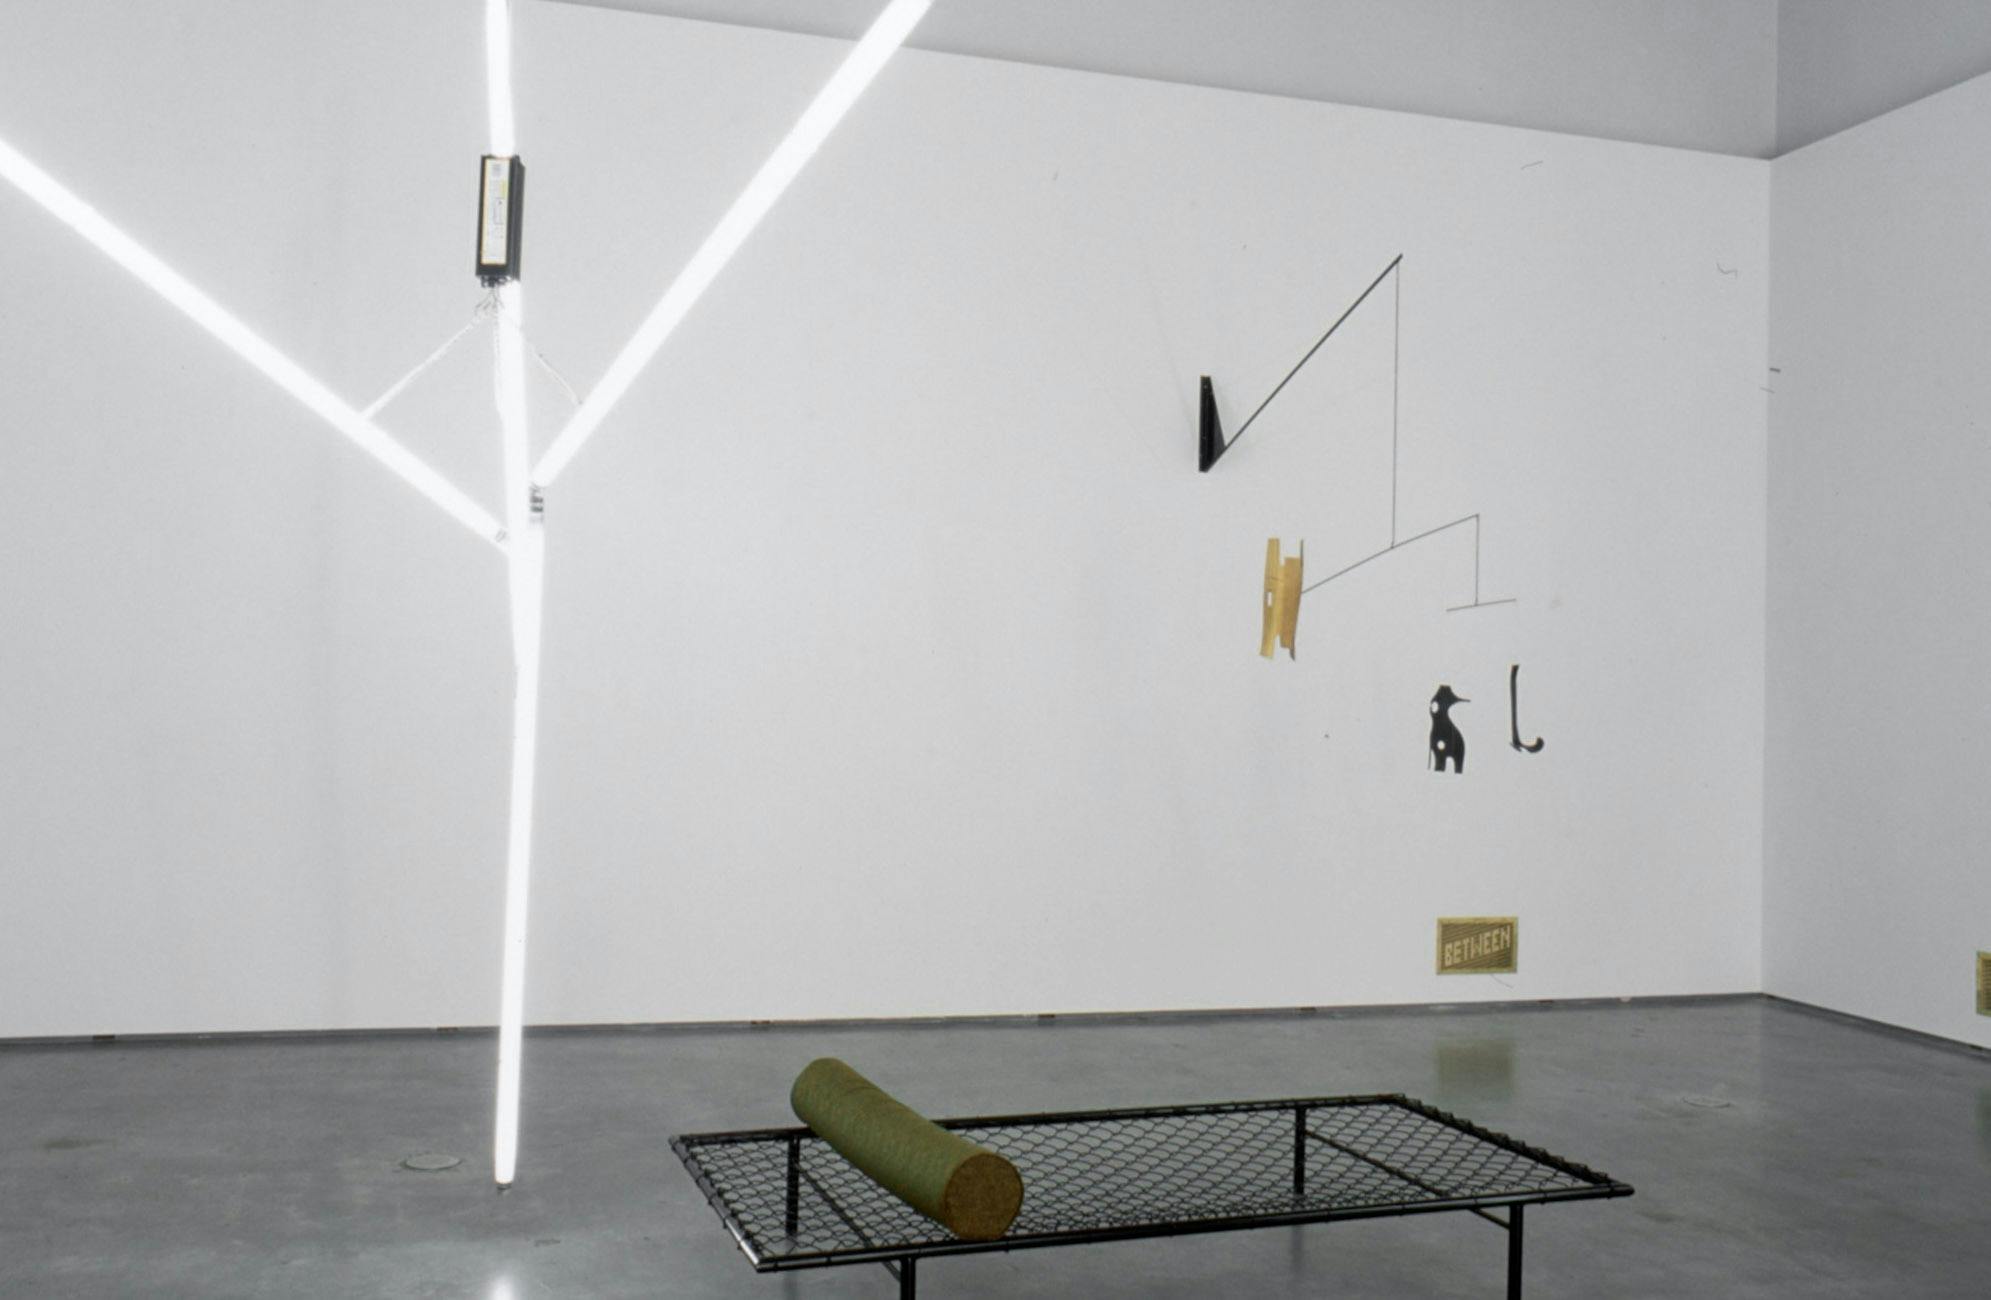 Three sculptures are installed in a gallery space. They are a large-sized sculpture made of tube light bulbs, a black bed frame, and a wire sculpture that hangs down objects to the air.